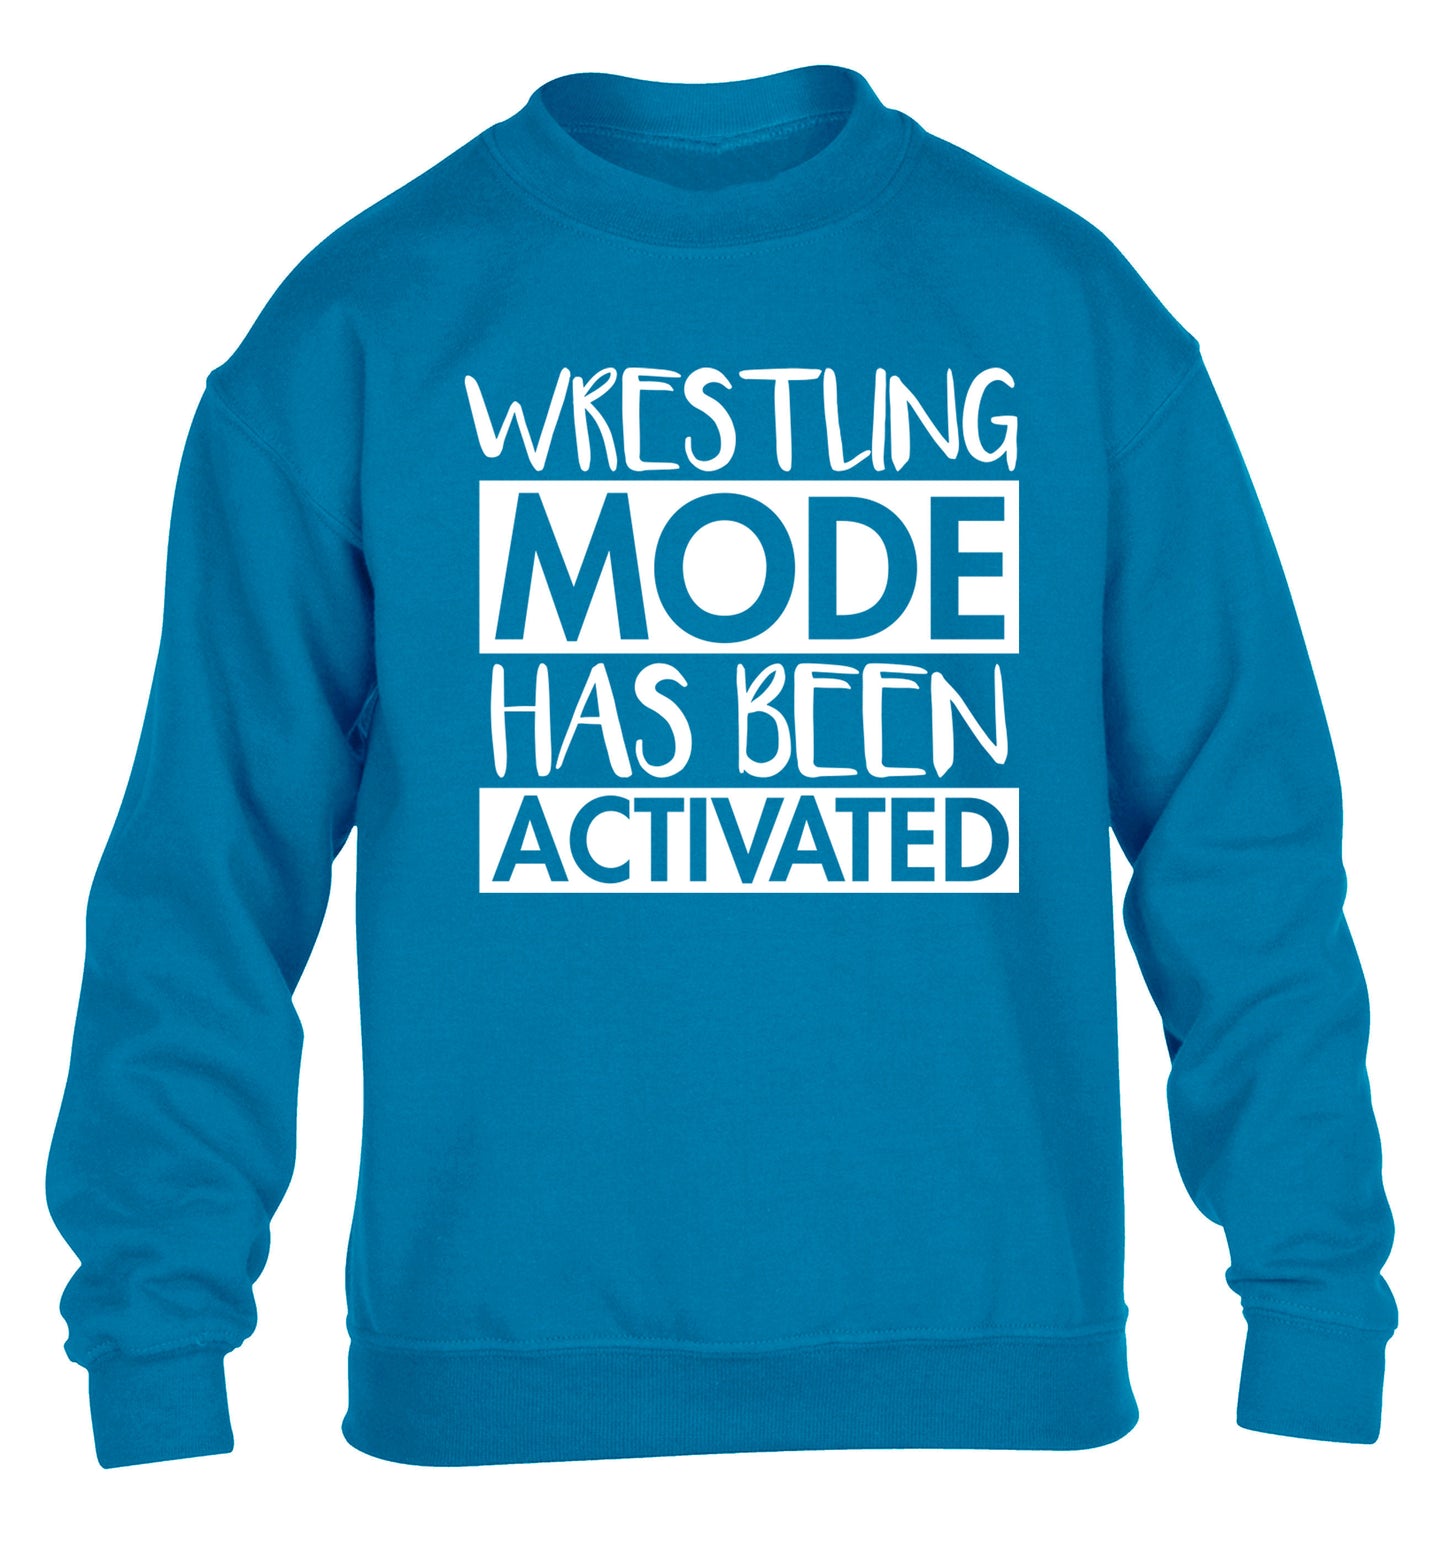 Wresting mode activated children's blue sweater 12-14 Years